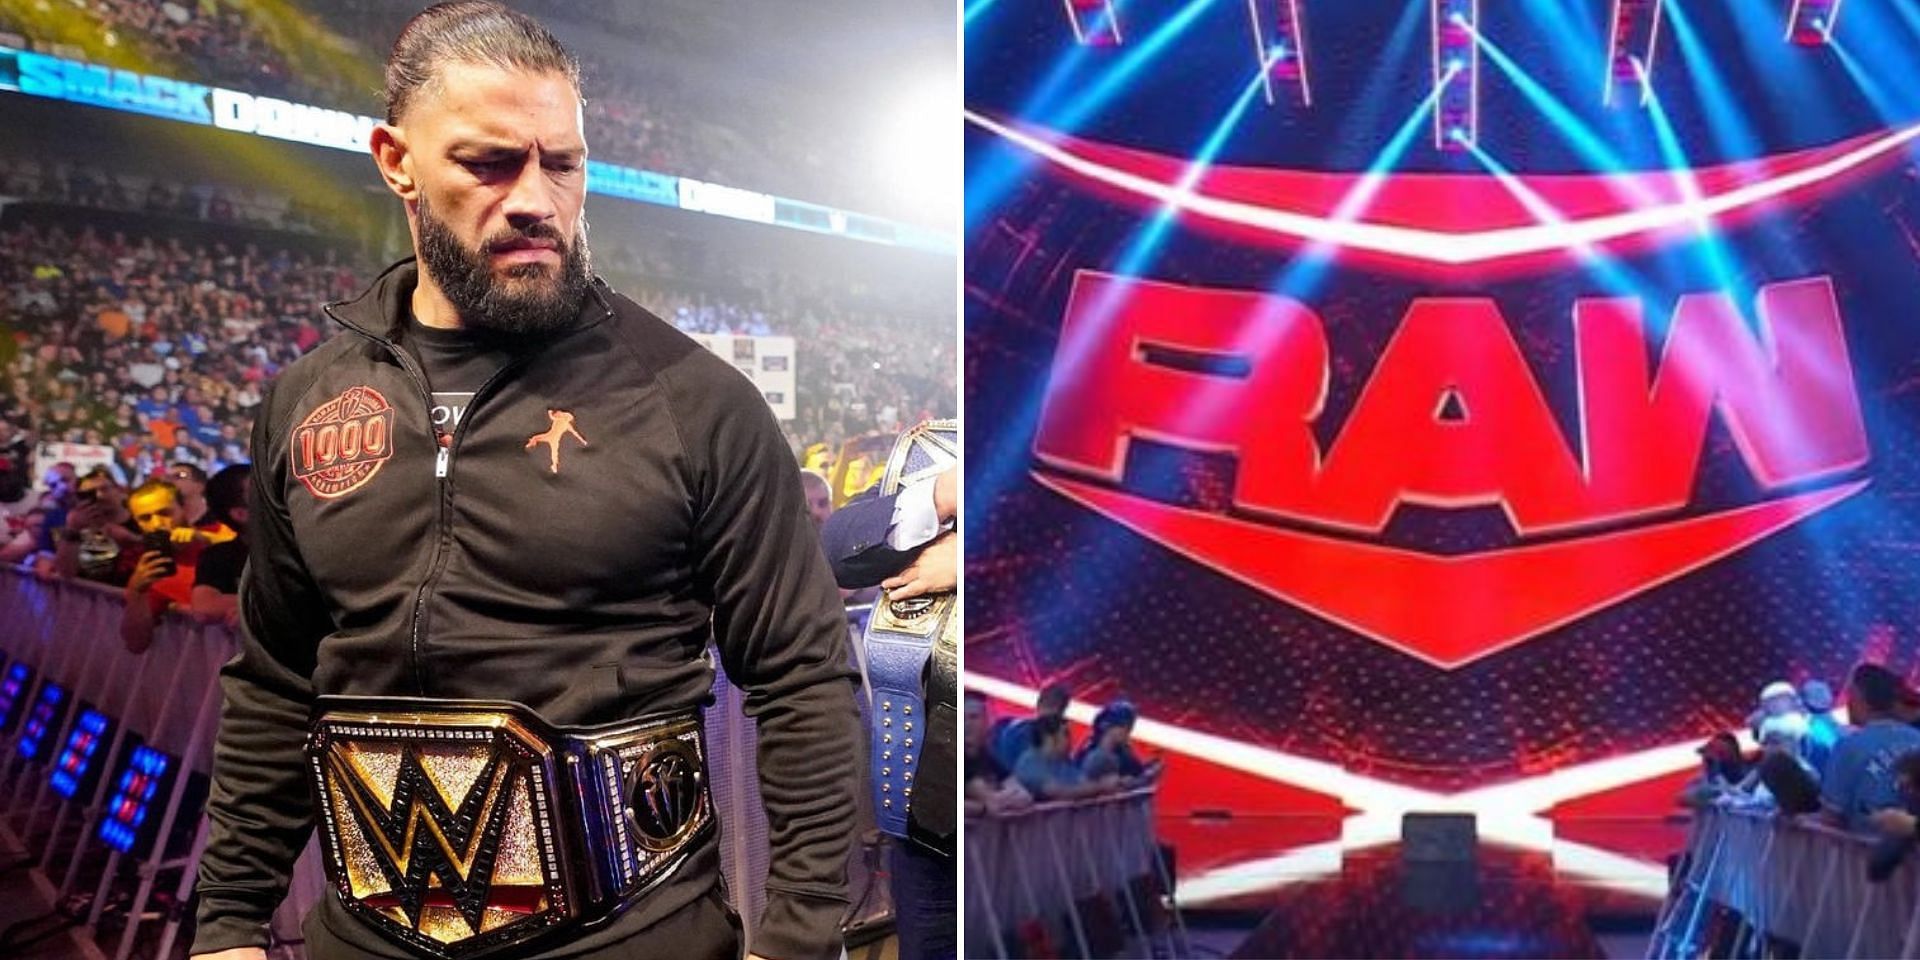 A wrestling veteran has commented on Roman Reigns